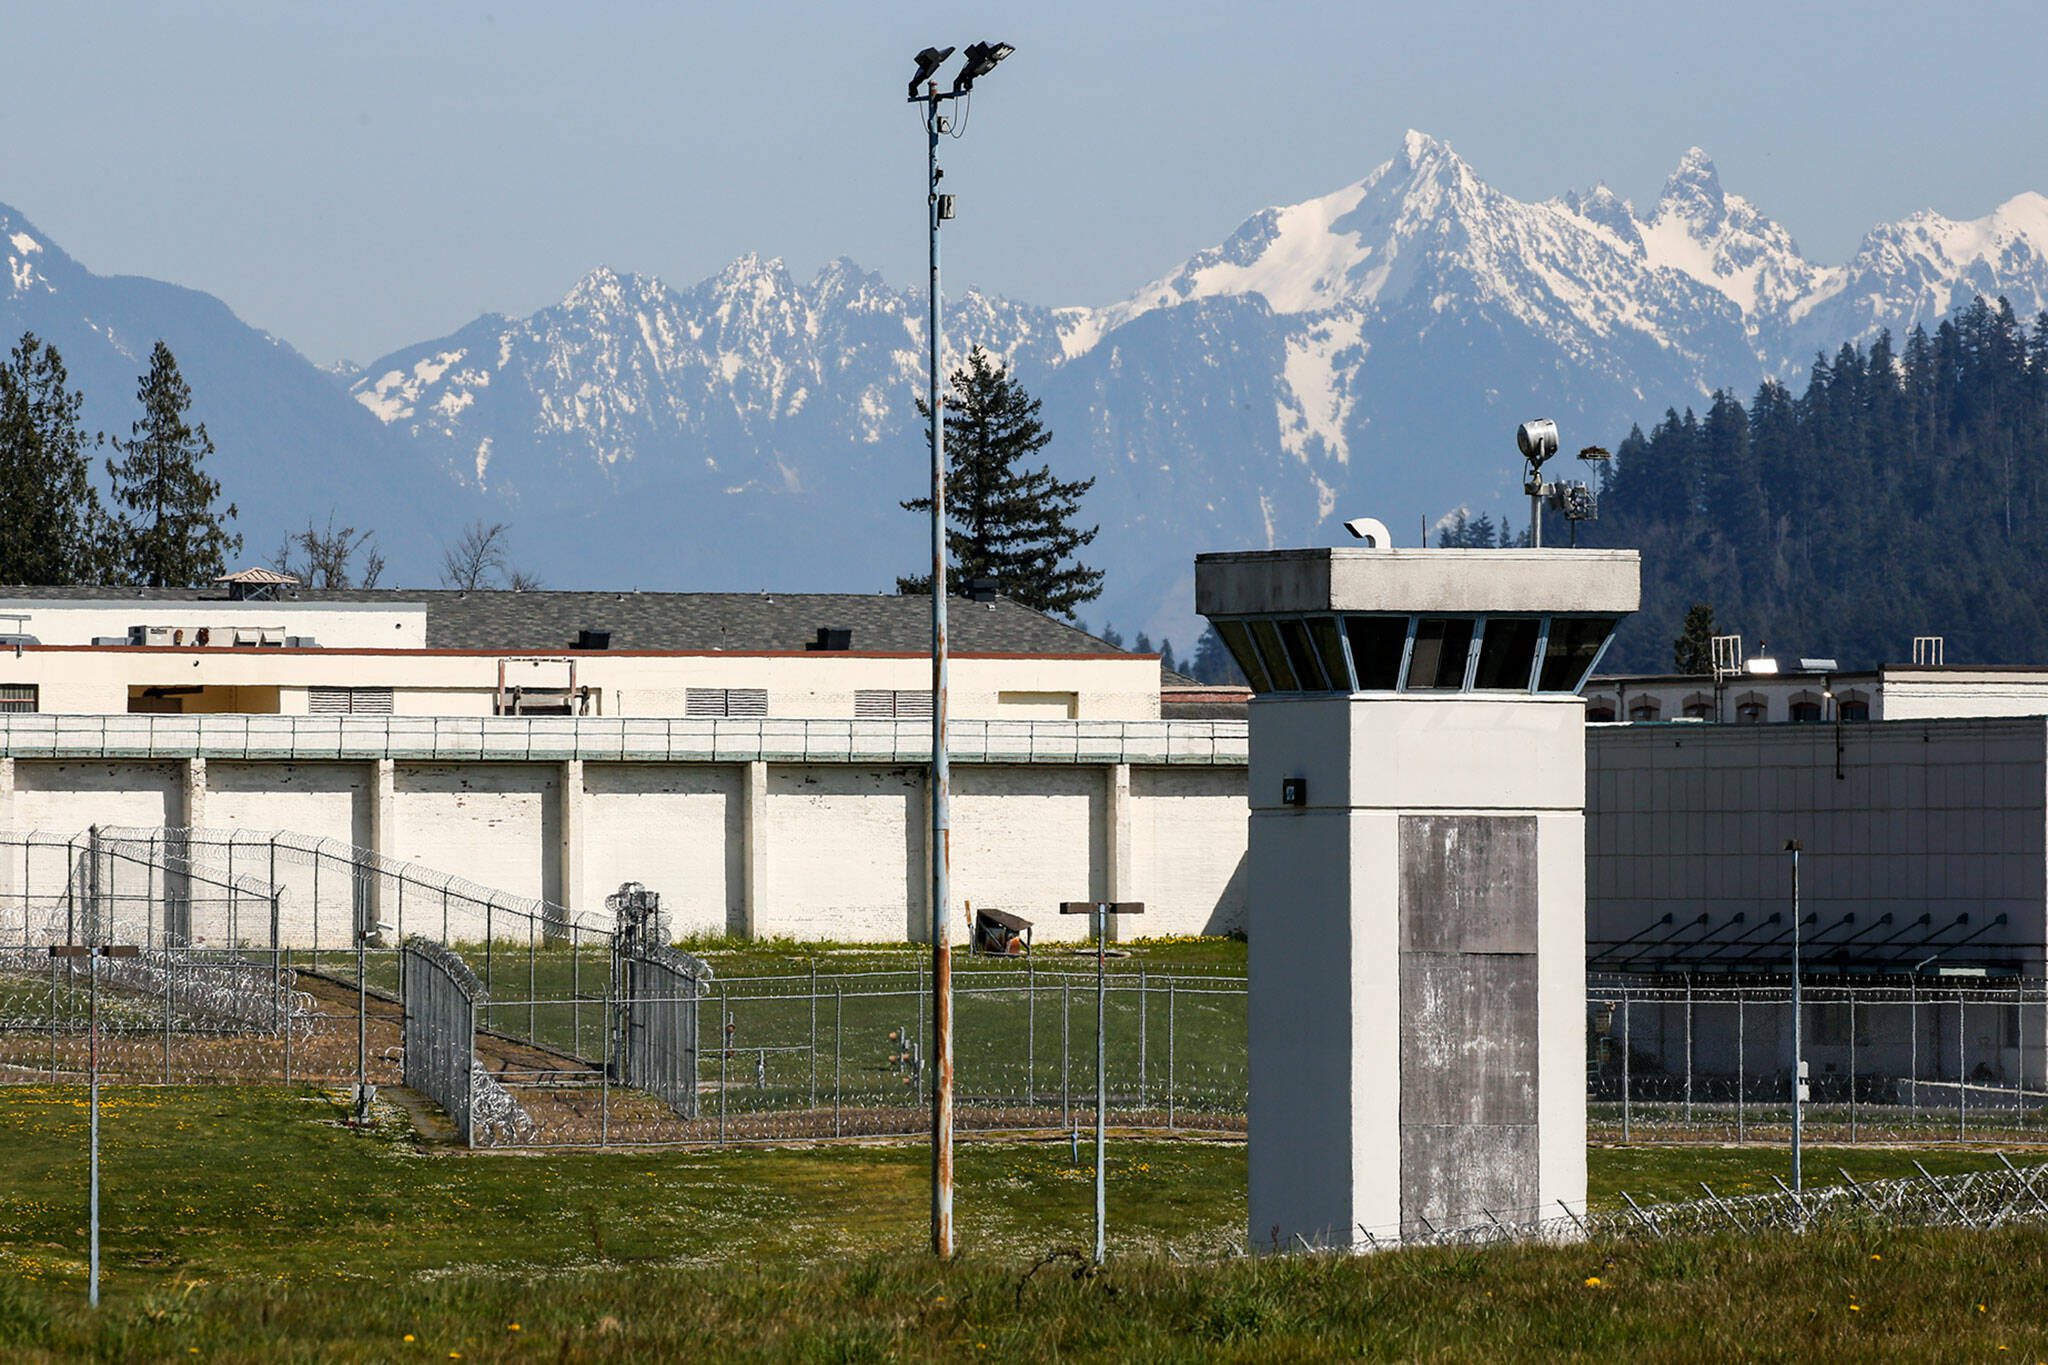 The Monroe Correctional Complex on Thursday, April 9, 2020. (Kevin Clark / The Herald)